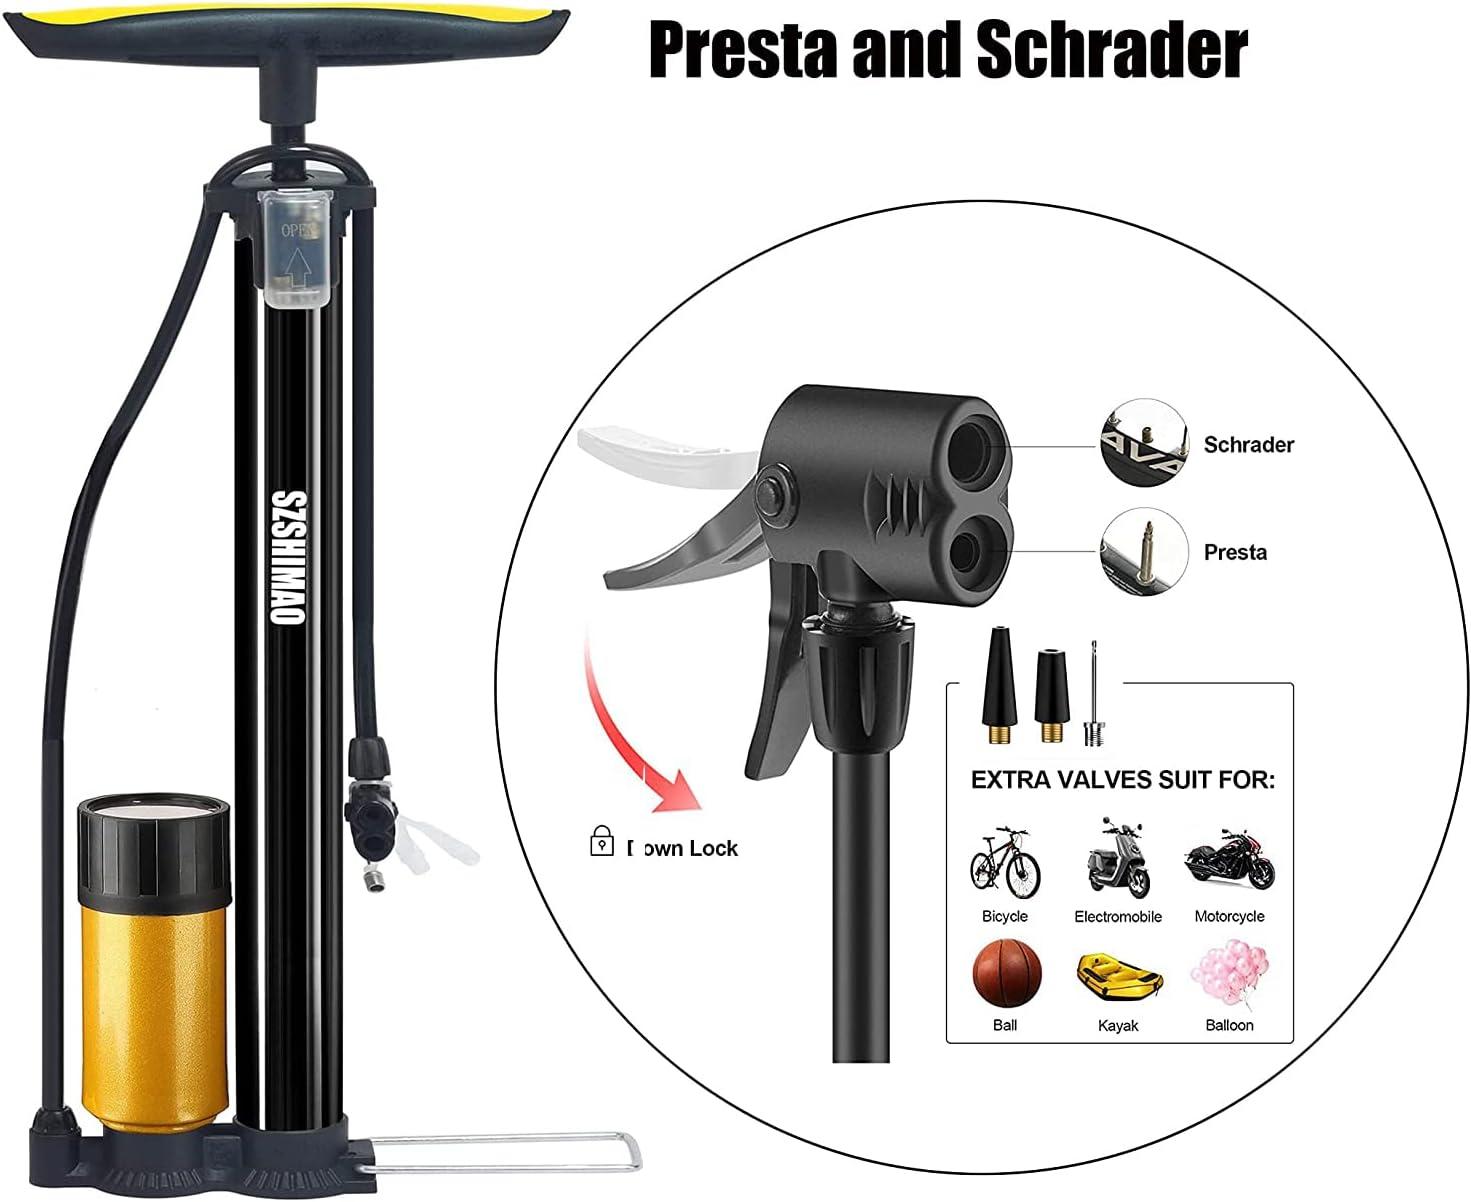 SZSHIMAO Portable Bicycle Pump - High Pressure Bike Pump - Fits Presta &  Schrader Valve - 160 PSI - Bicycle Tire Pump - Air Pump with Ball Needle  for All Road, Mountain